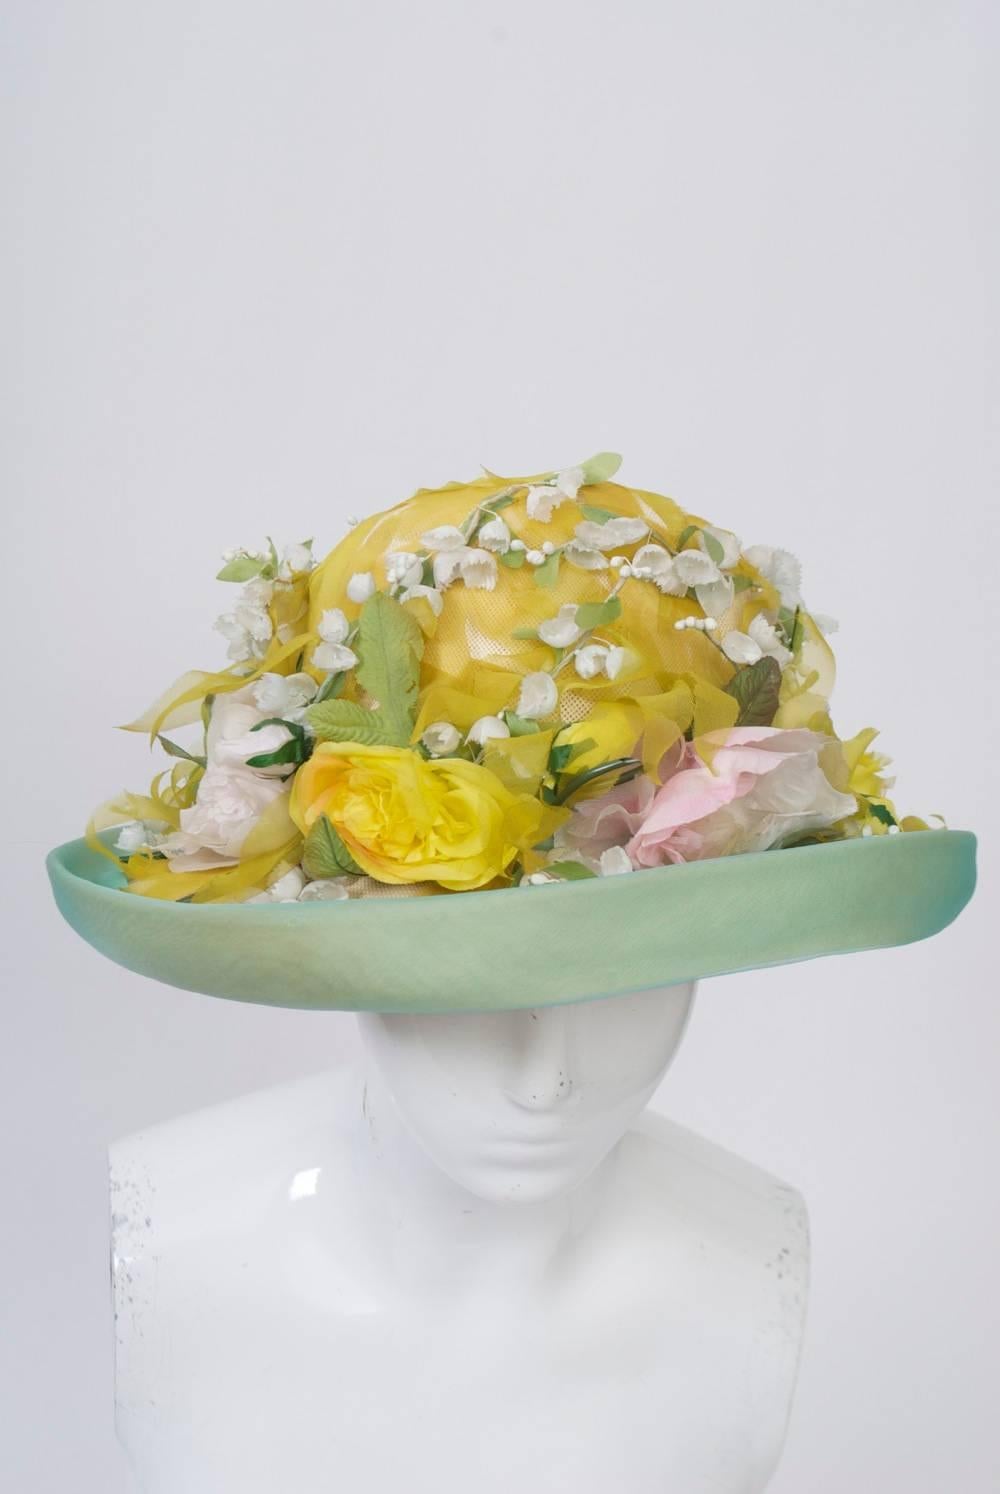 Profusely embellished natural fine straw hat with wide brim trimmed in pale green organza, the crown covered with ribbons of yellow organza, and the upper side of the brim decorated in pale pink and yellow flowers accented with lily of the valley.